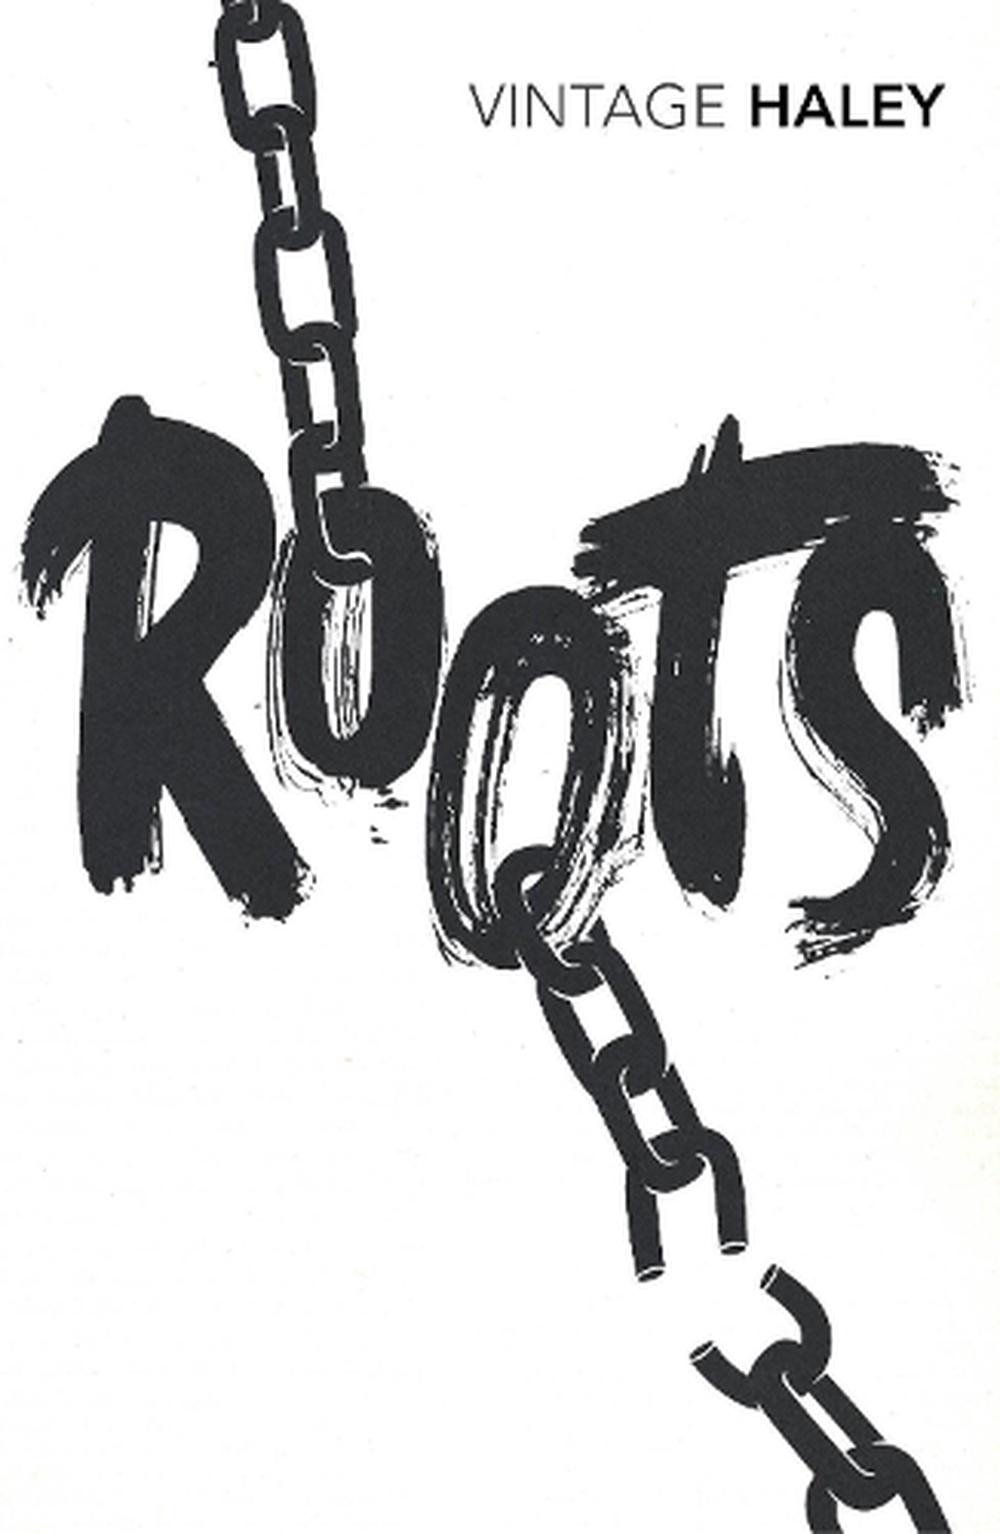 roots the saga of an american family movie